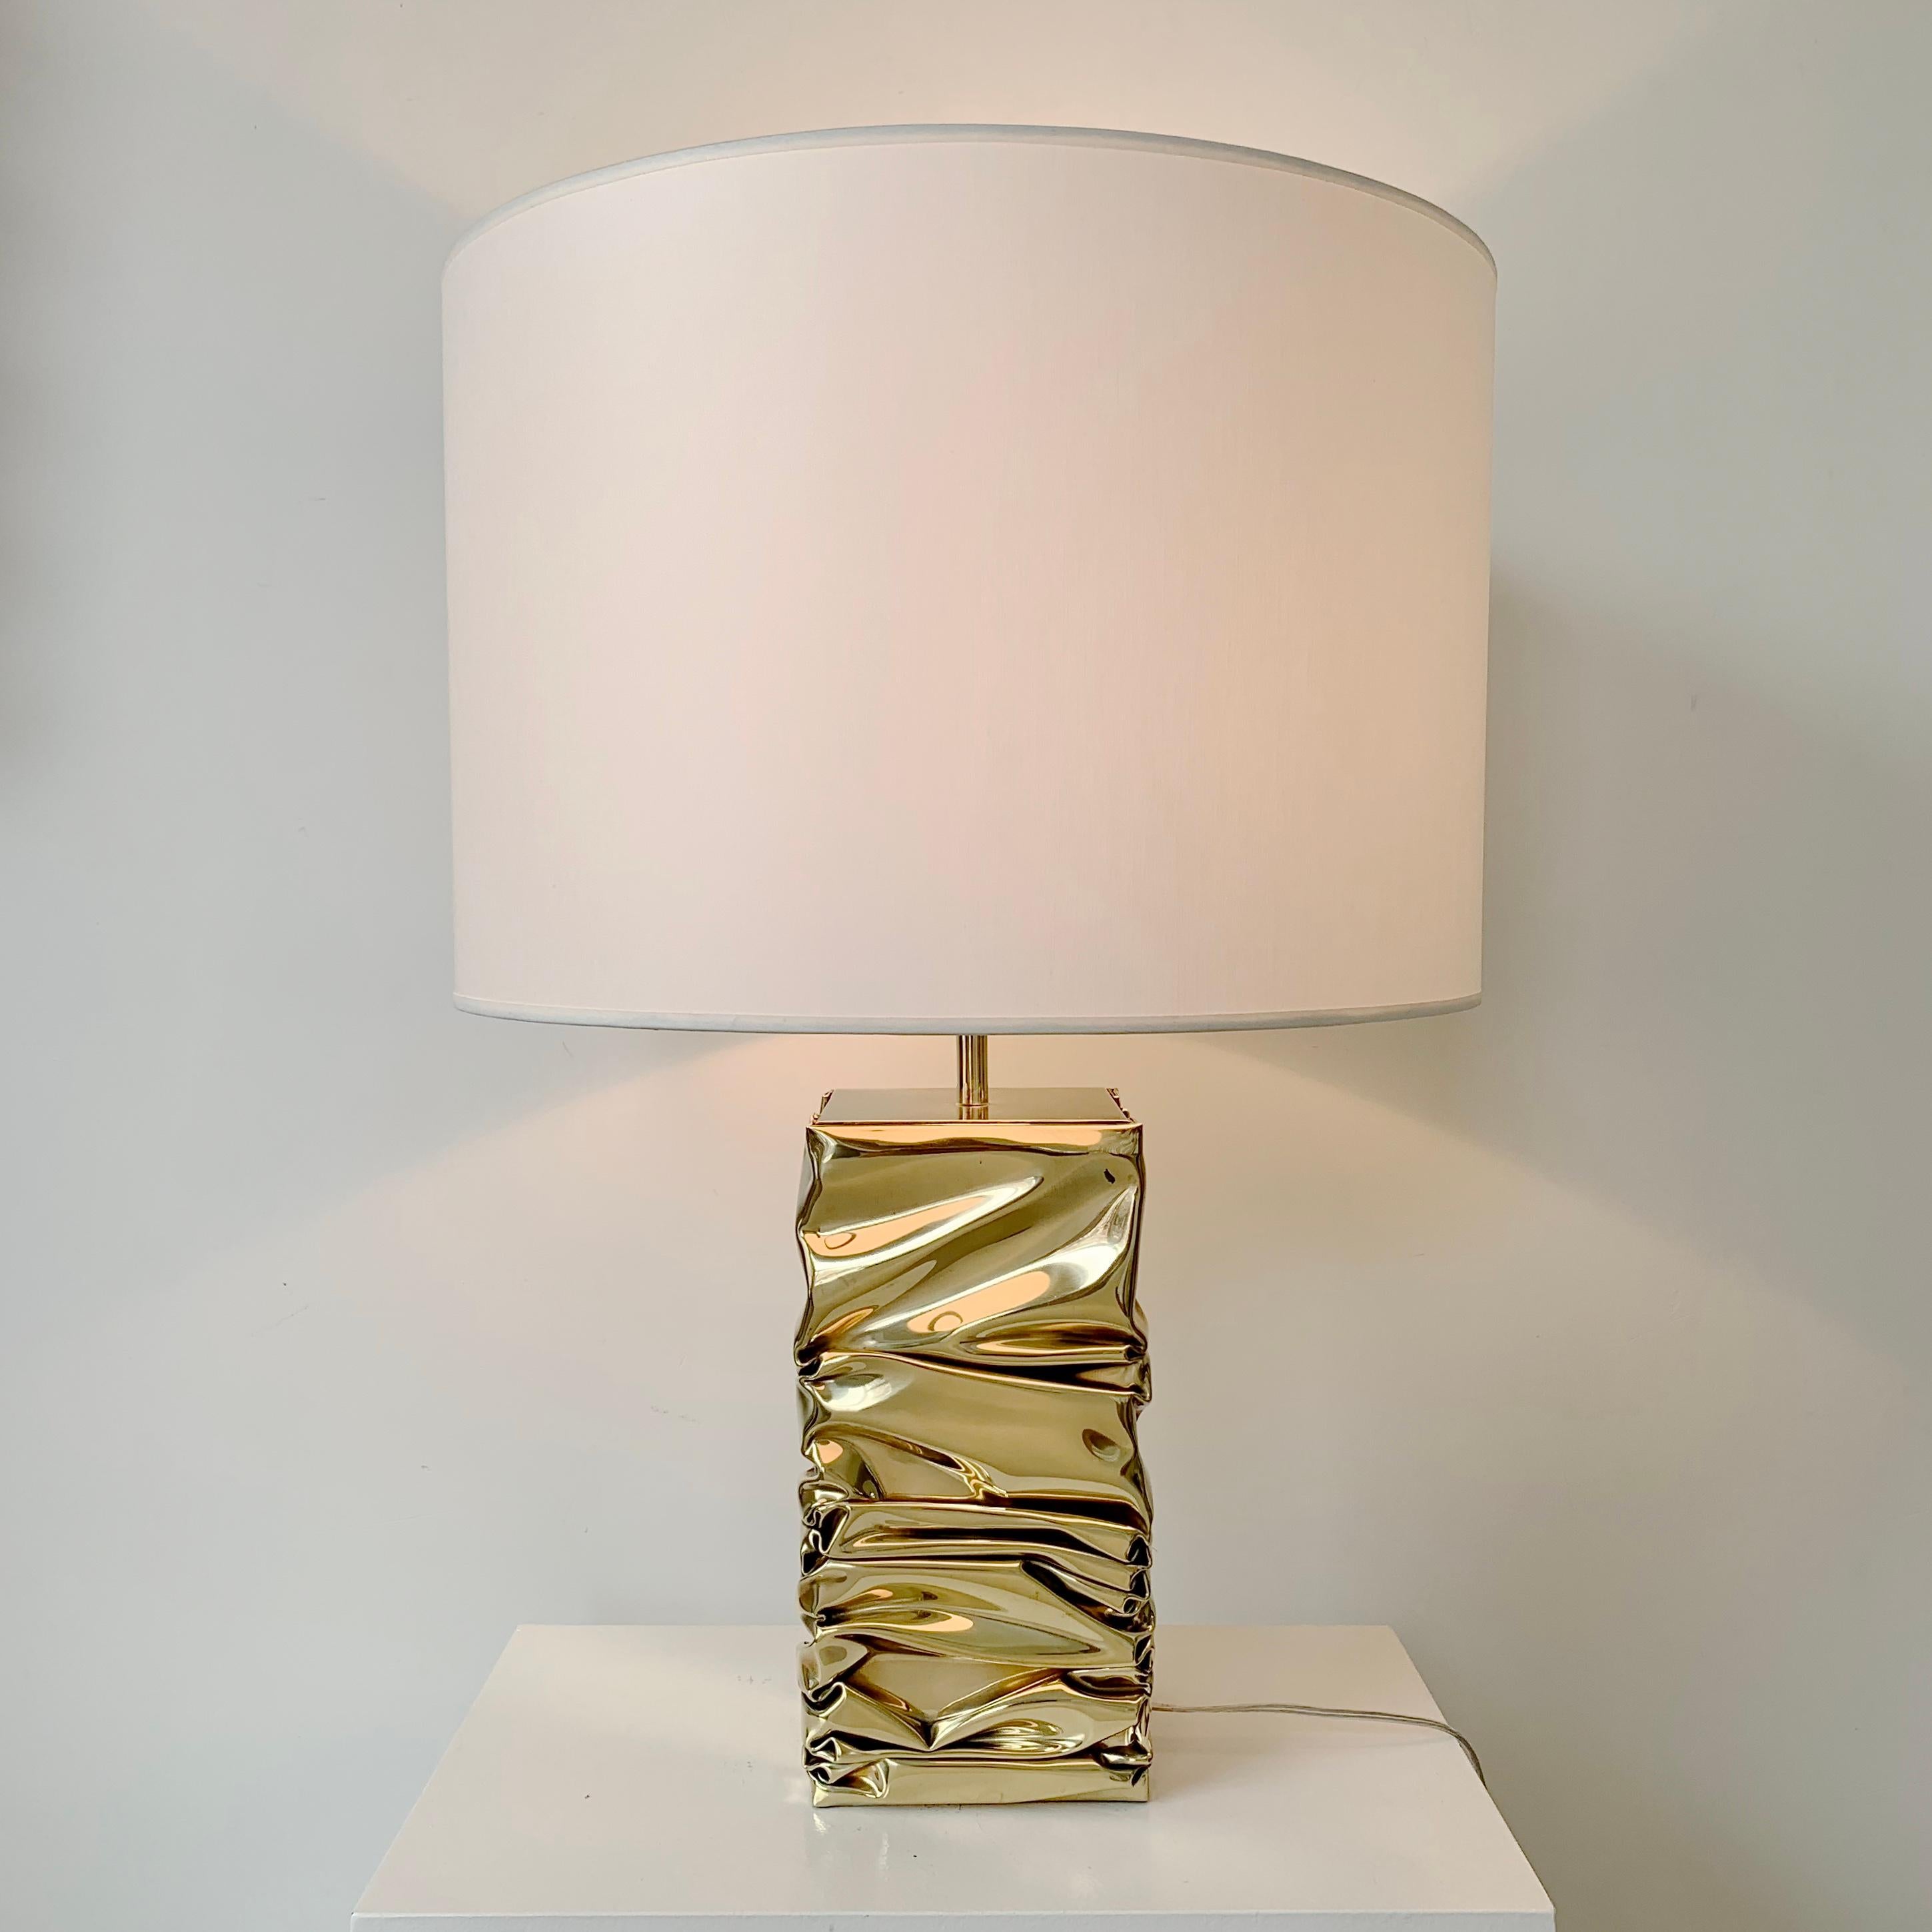 Mid-Century Modern Jacques Moniquet Signed Brass Table Lamp, circa 1975, France. For Sale